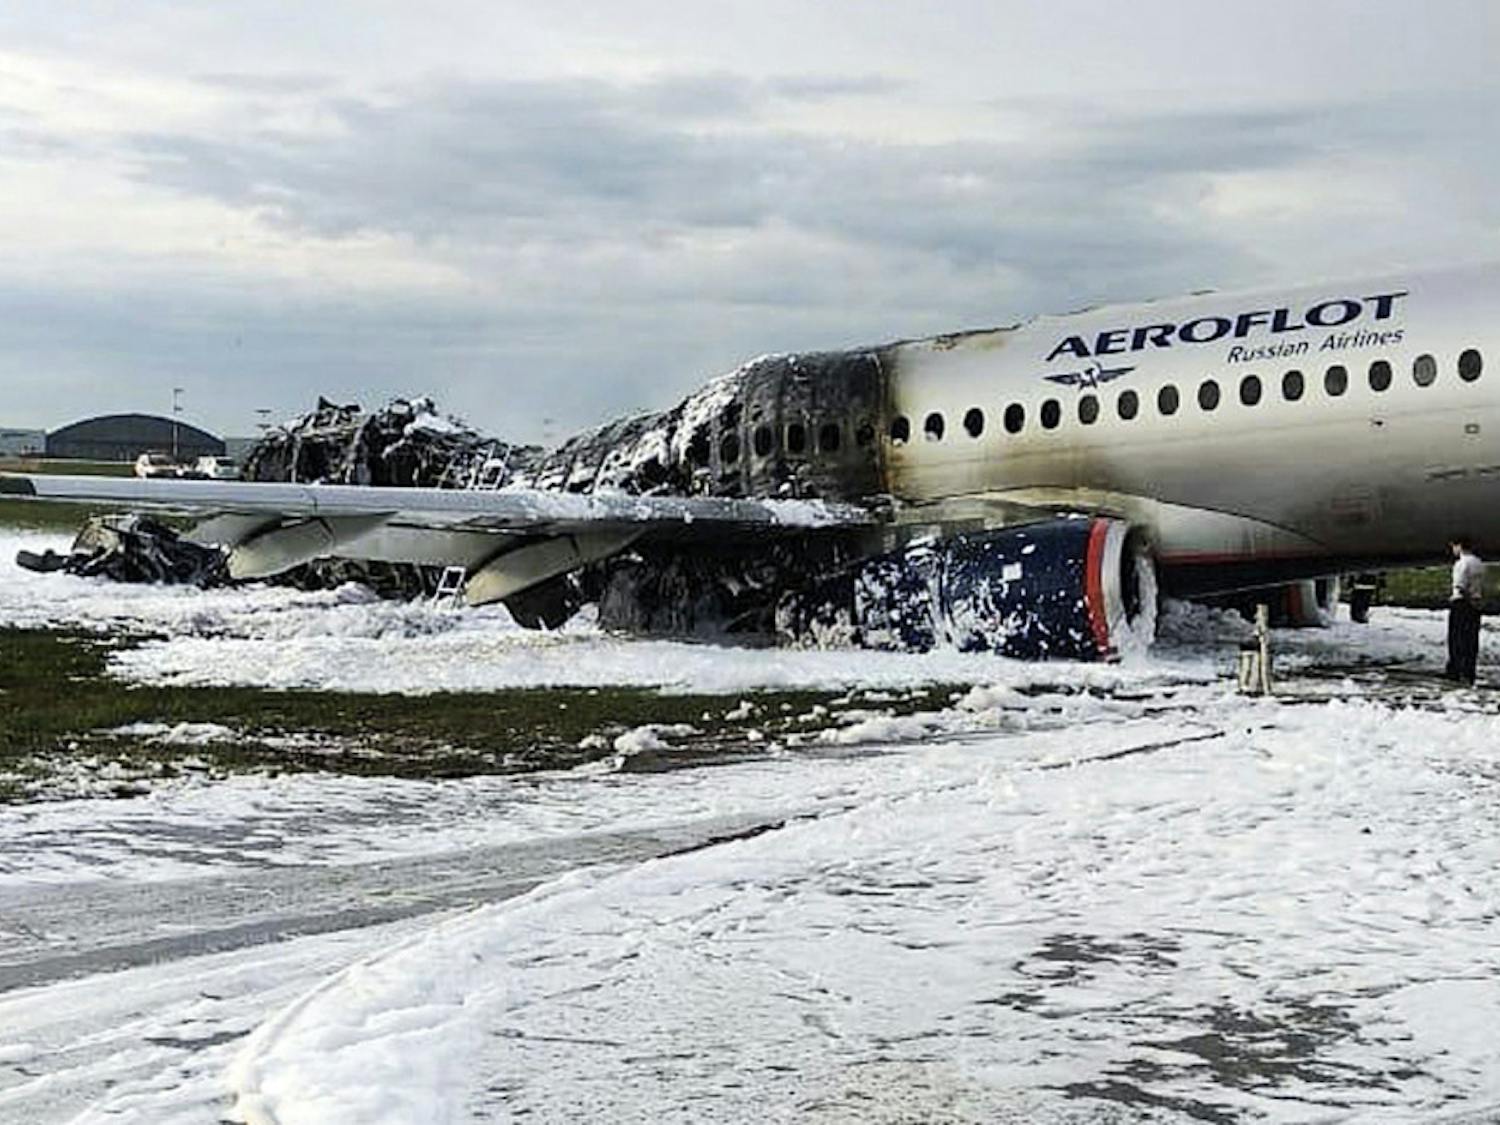 The Sukhoi SSJ100 aircraft of Aeroflot airlines is covered in fire retardant foam after an emergency landing in Sheremetyevo airport in Moscow, Russia, Sunday, May 5, 2019. Scores of people died when the Aeroflot airliner burst into flames while making the emergency landing at the airport Sunday evening, officials said.